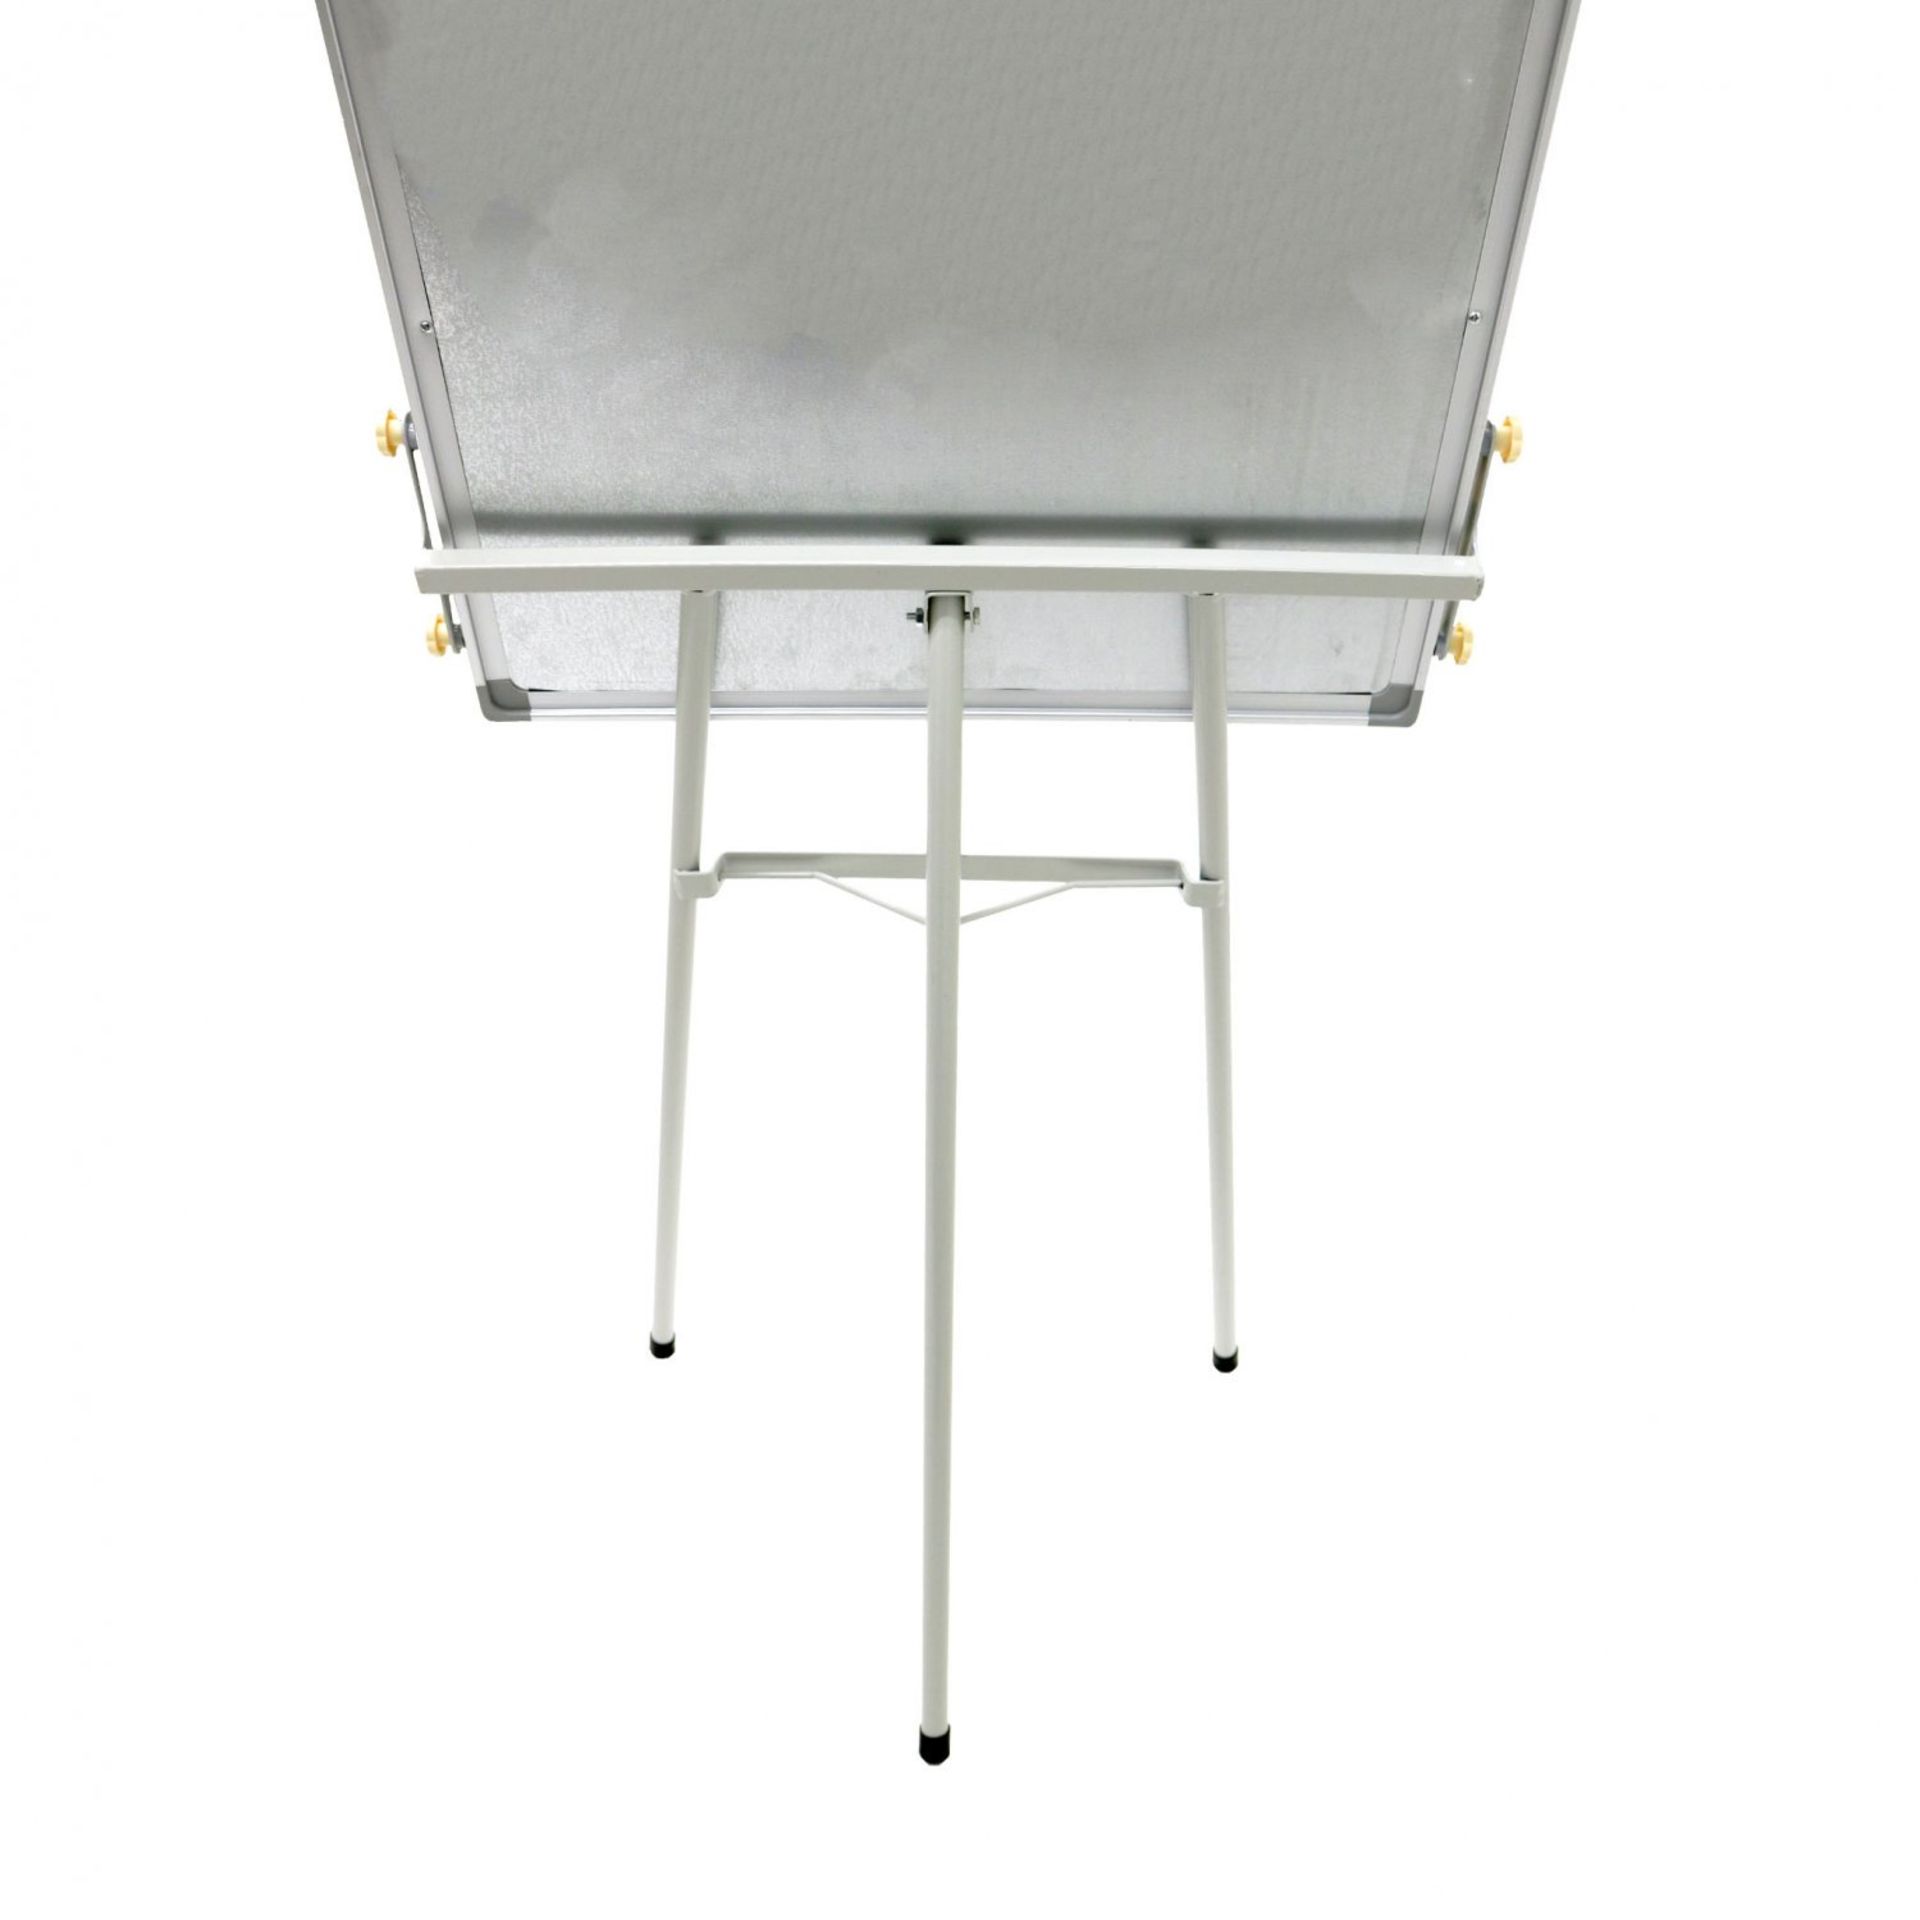 (L55) A1 Flipchart Easel Magnetic Presentation Whiteboard with Eraser Holds A1 Flipchart Pads ... - Image 2 of 2